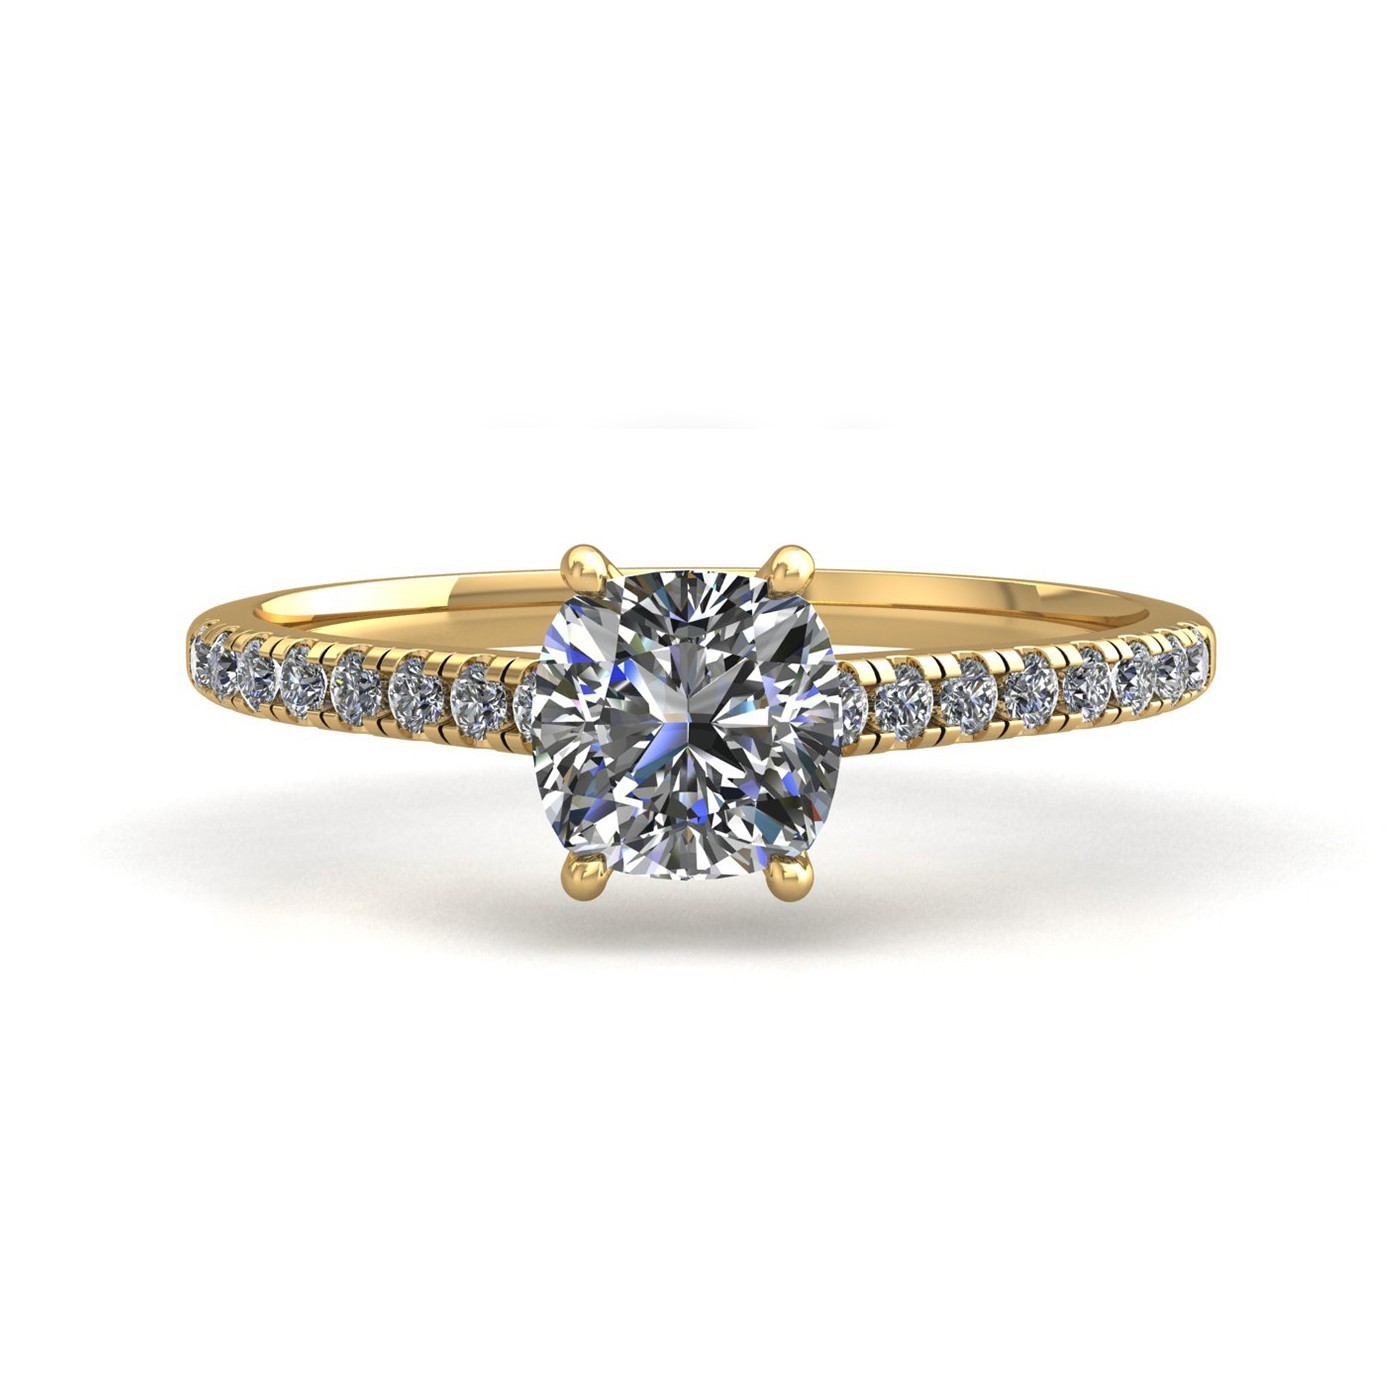 18k yellow gold 0,80 ct 4 prongs cushion cut diamond engagement ring with whisper thin pavÉ set band Photos & images